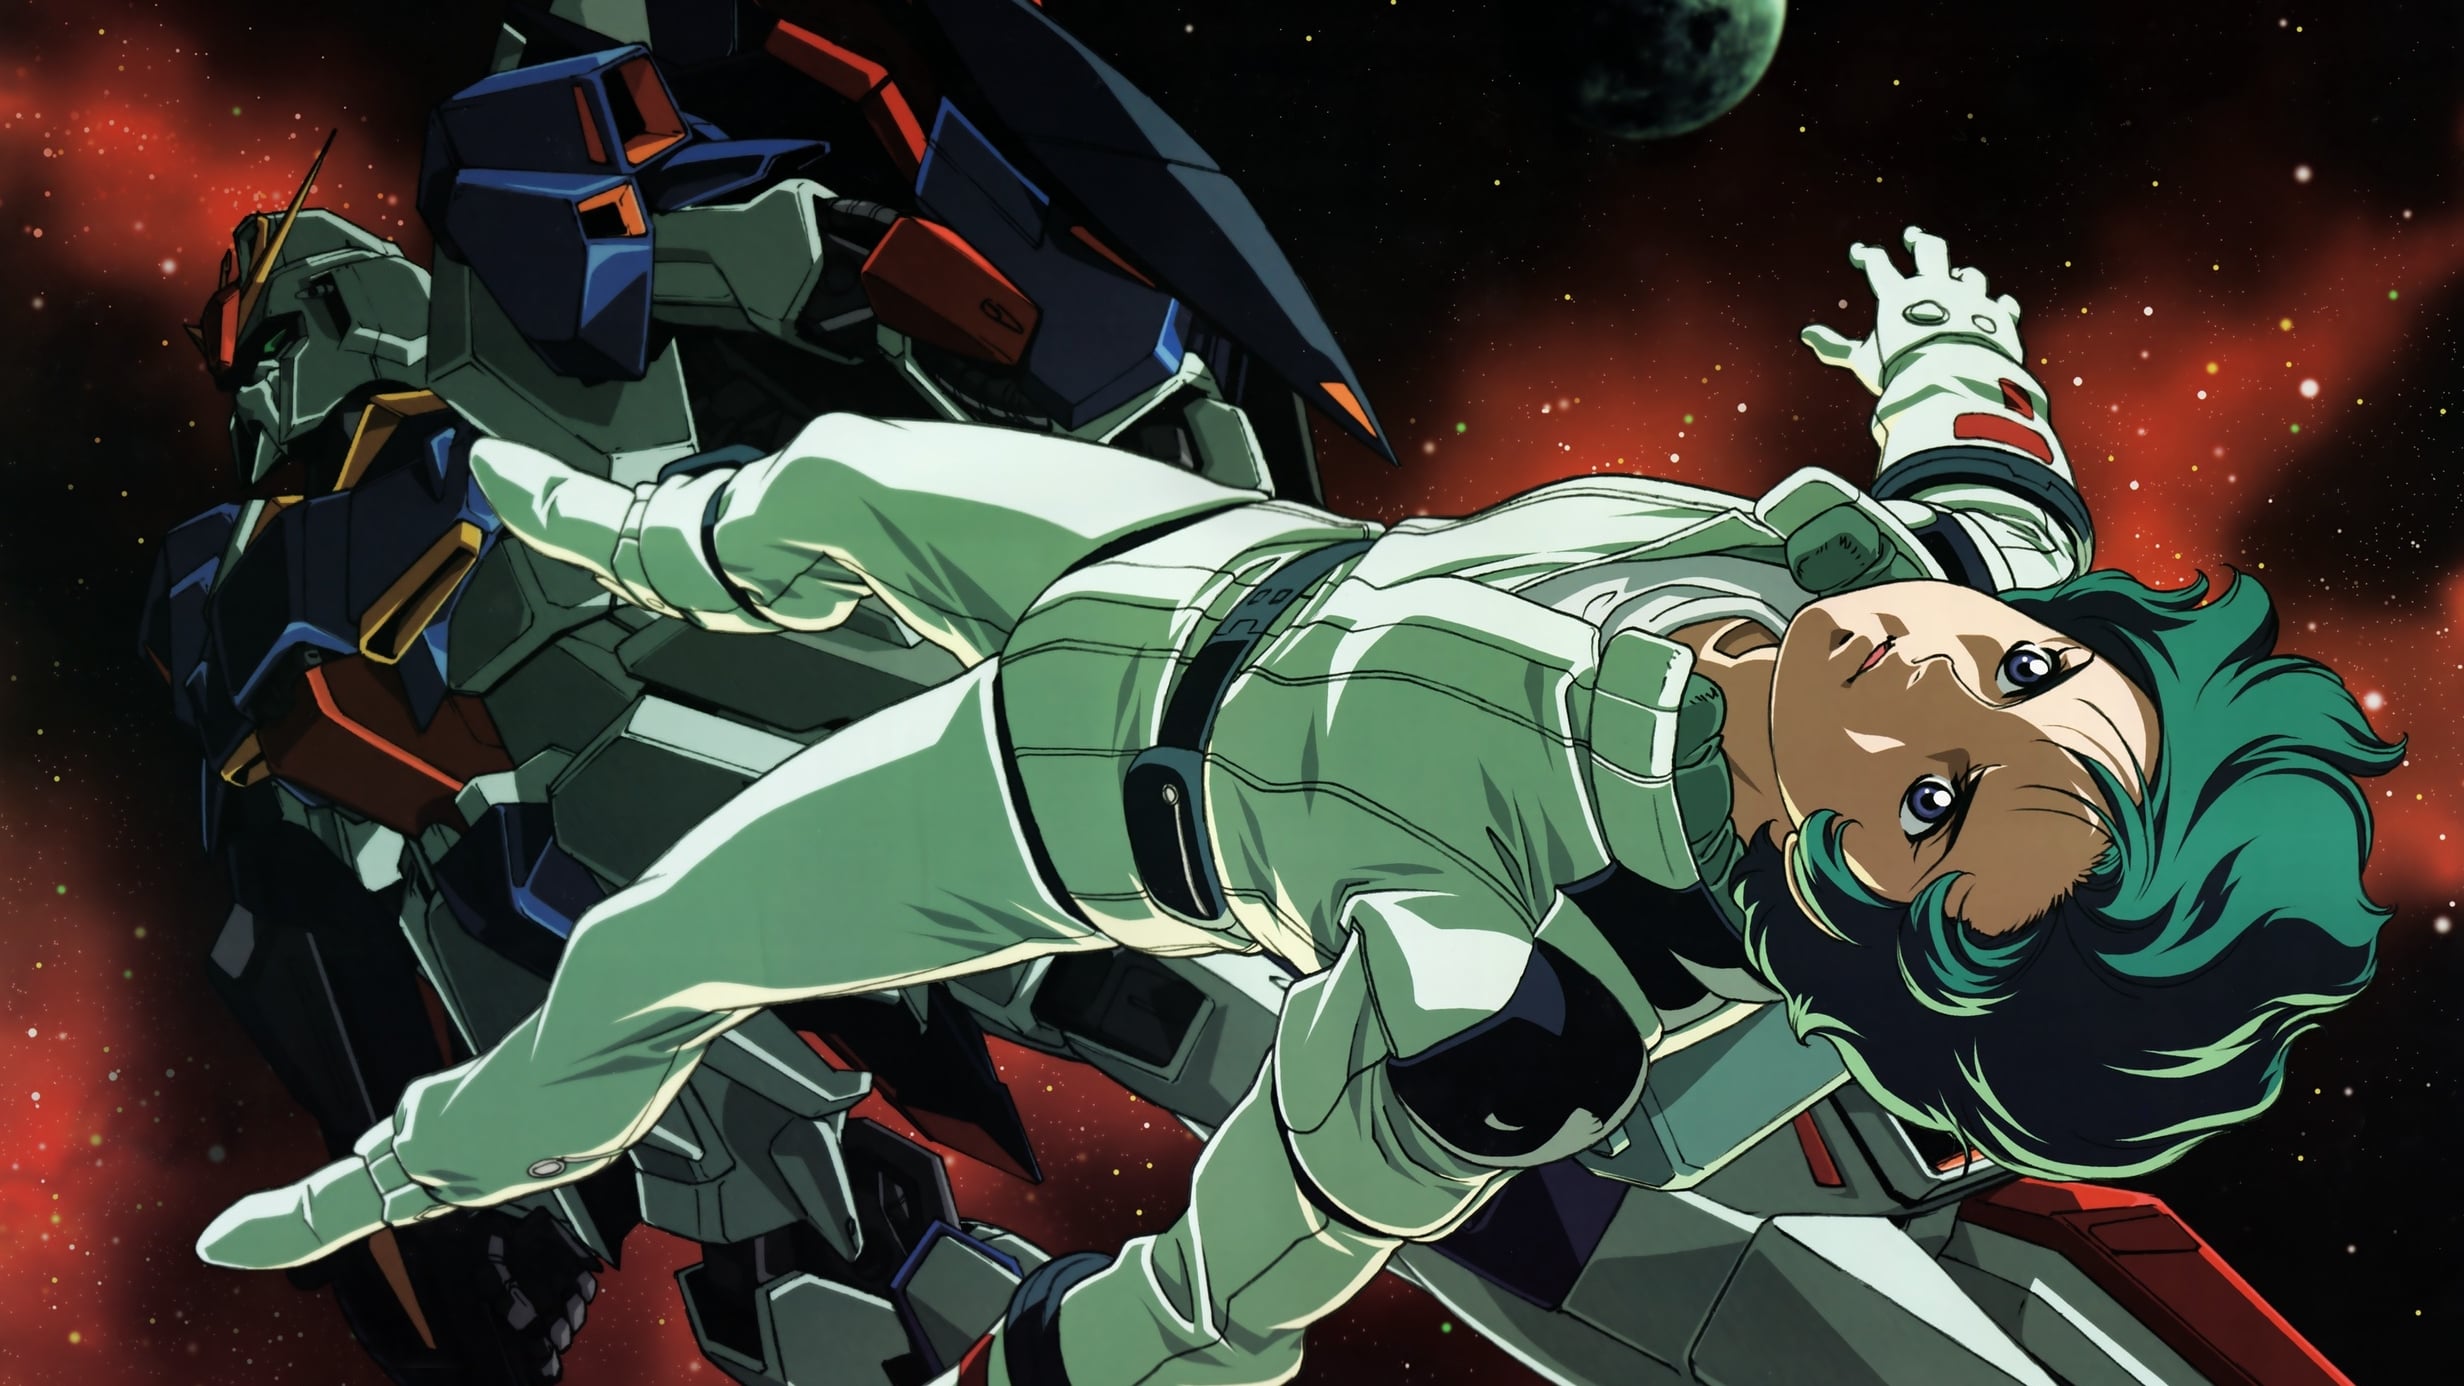 Mobile Suit Zeta Gundam - A New Translation III: Love is the Pulse of the Stars (2006)